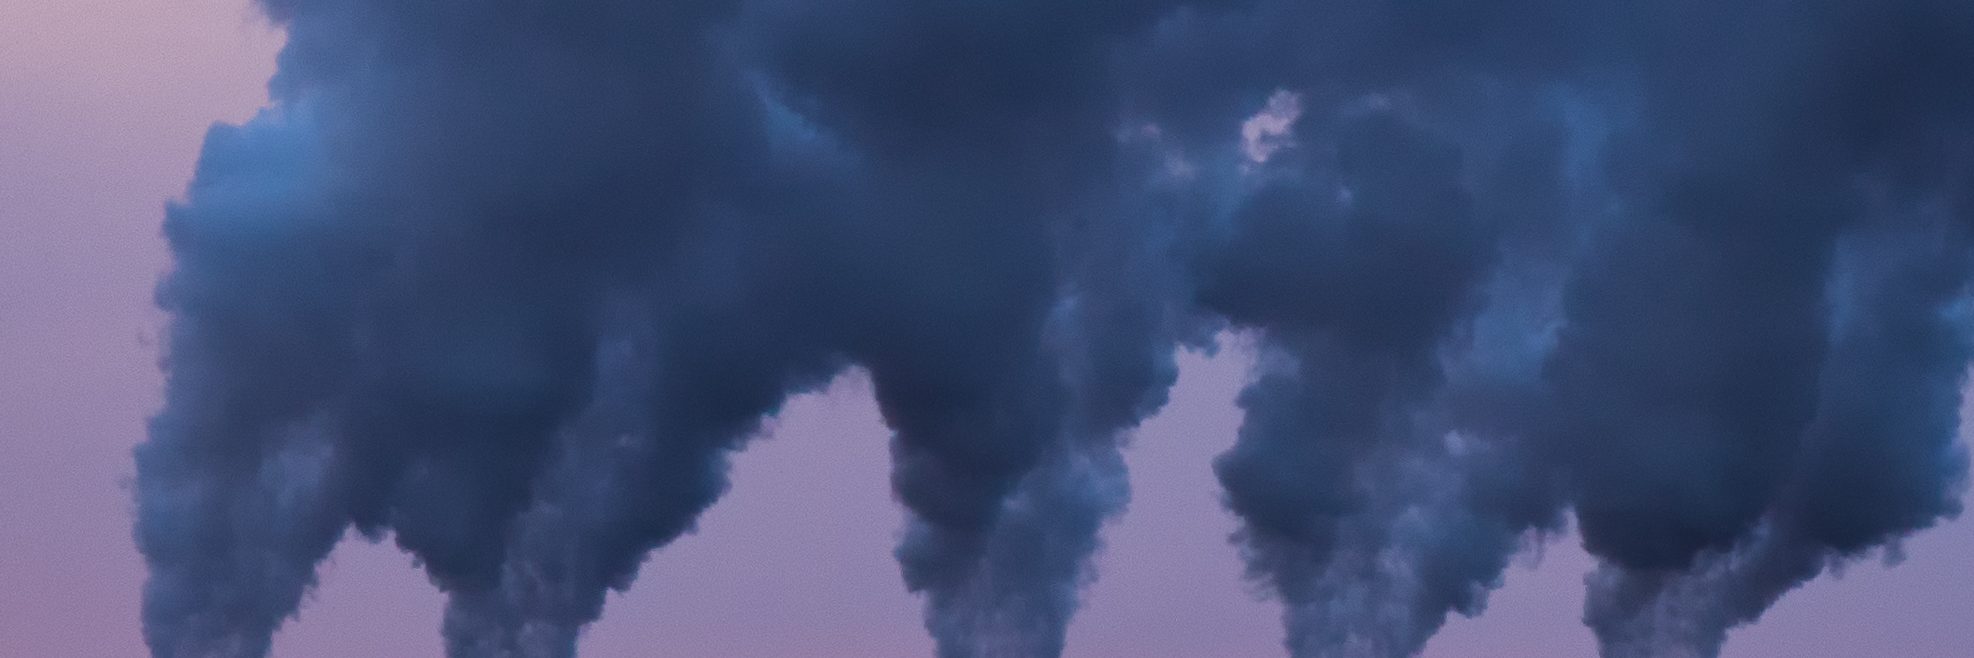 Smoke stacks at the Cleveland-Cliffs Northshore Mining Company in Silver Bay, Minnesota. The smoke stacks are pumping pollutants into the air as byproduct from creating fossil fuel.